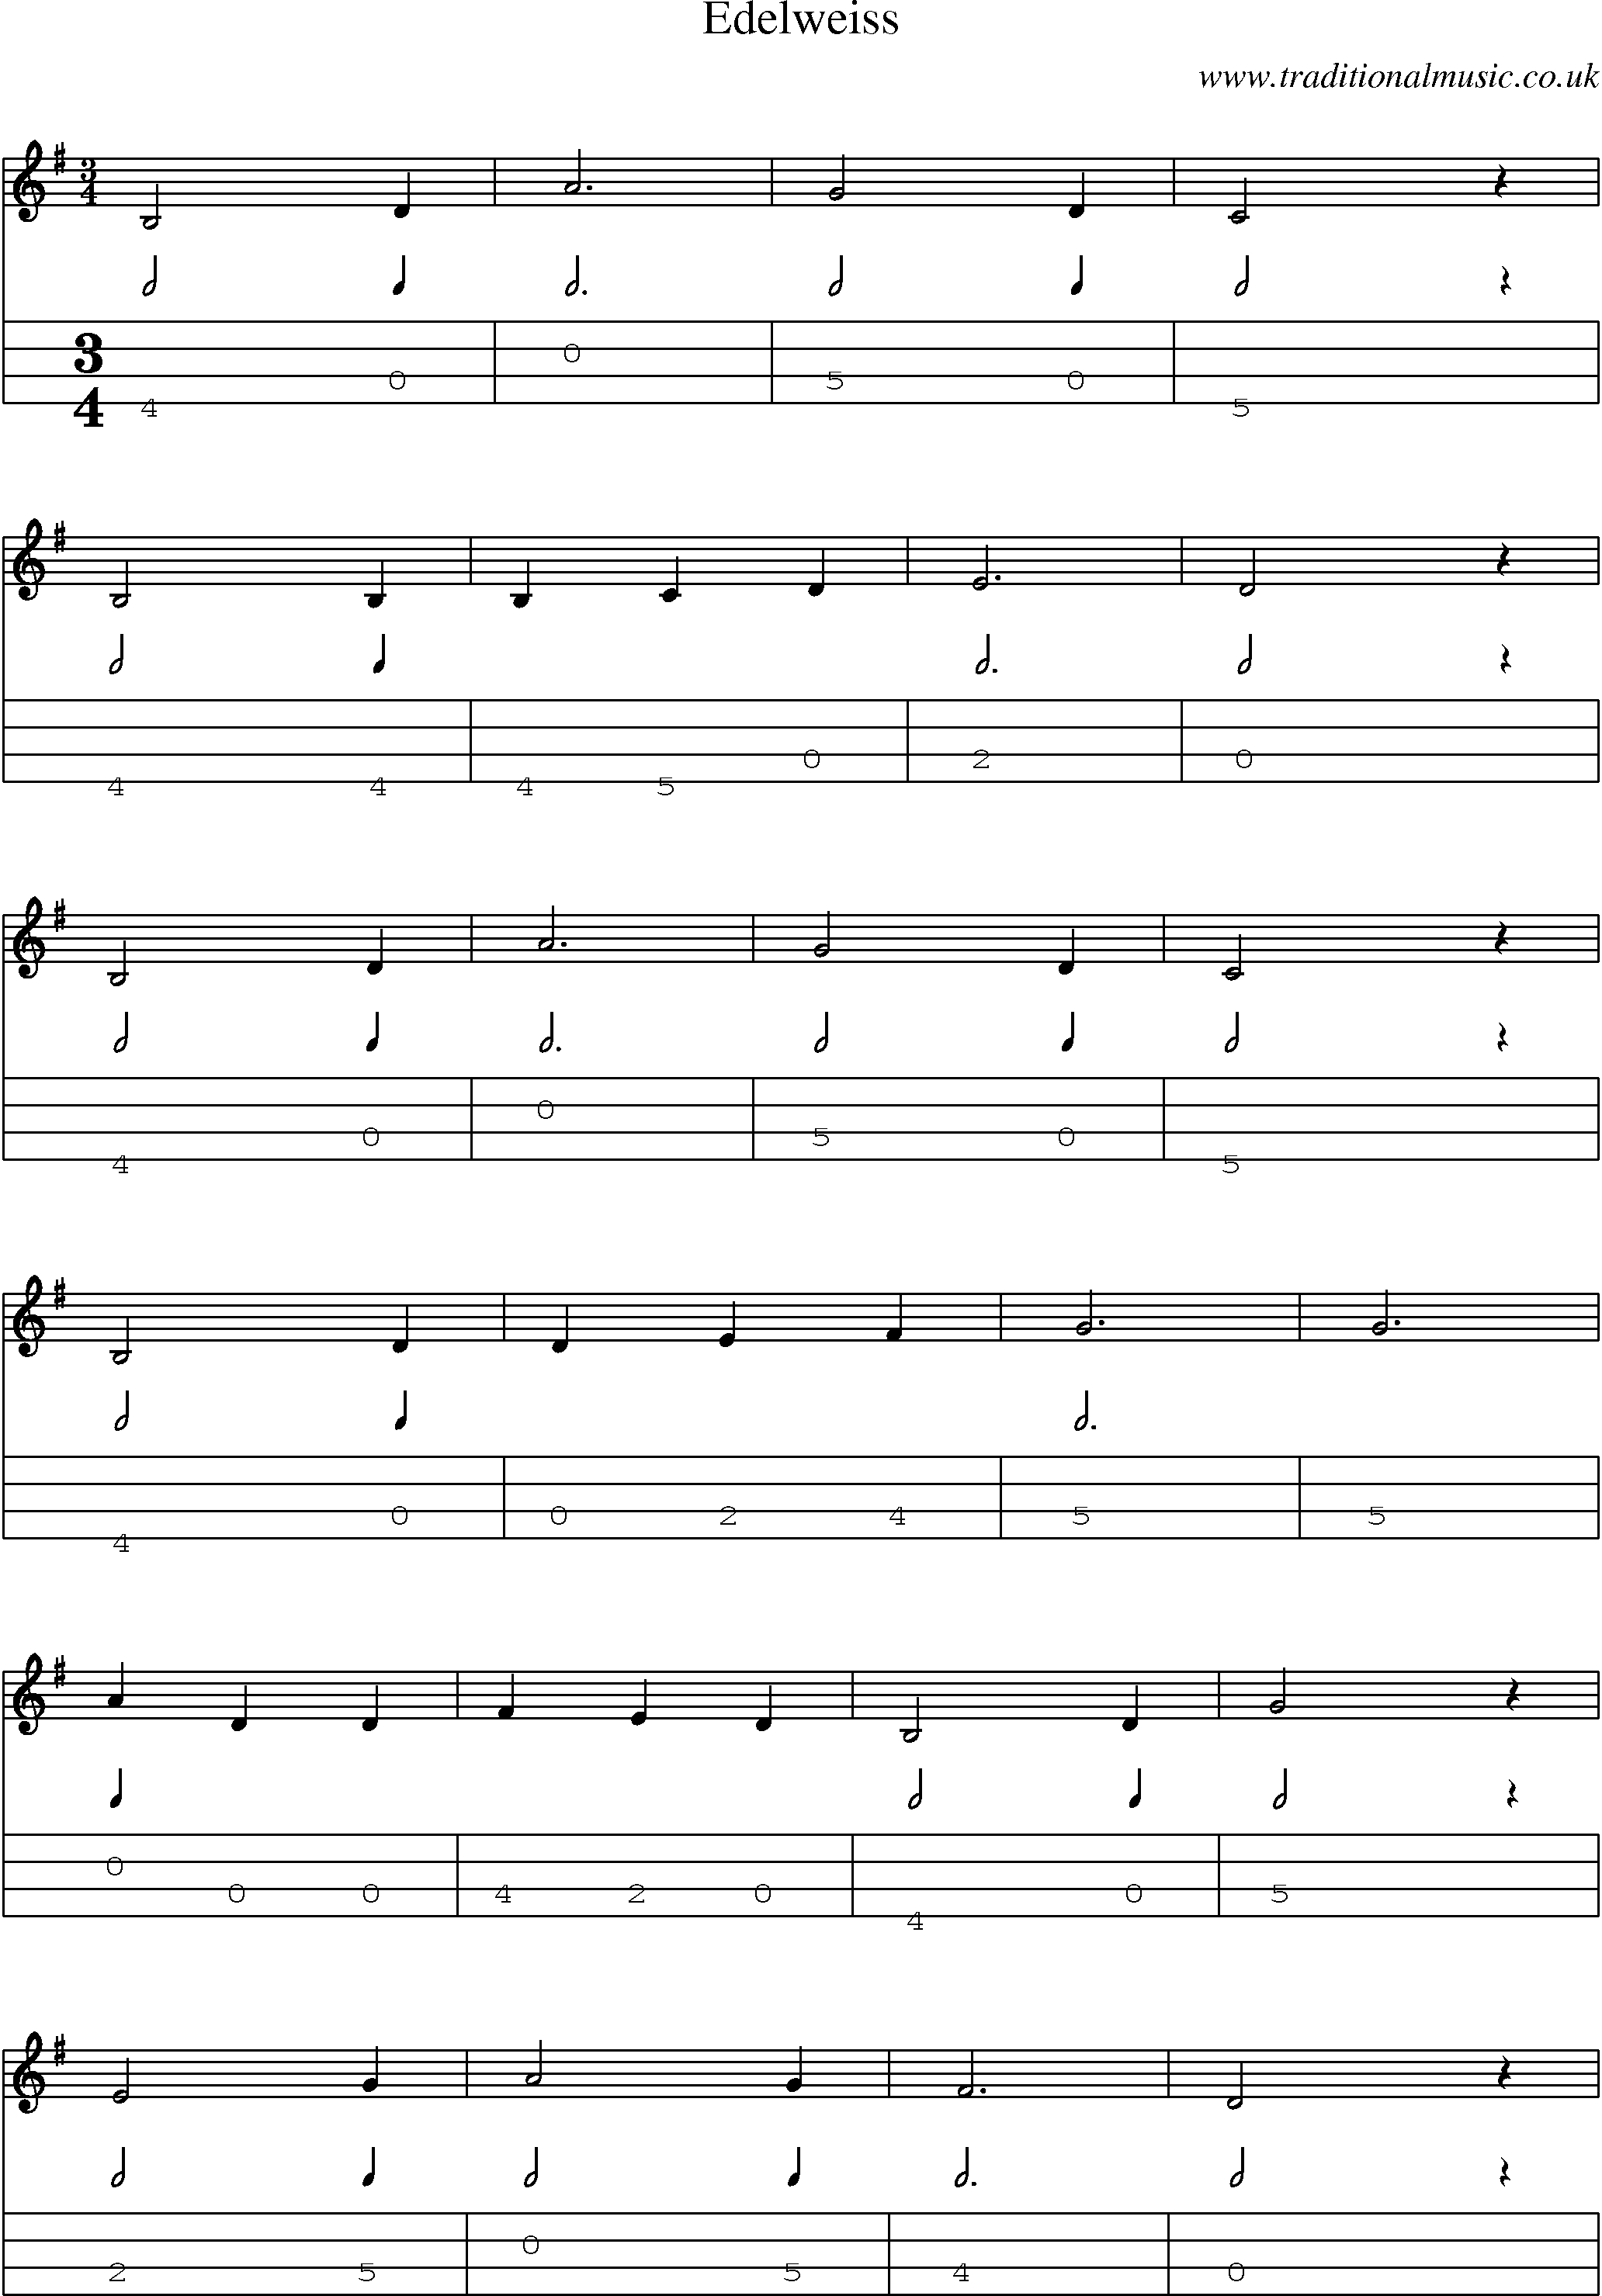 Music Score and Mandolin Tabs for Edelweiss